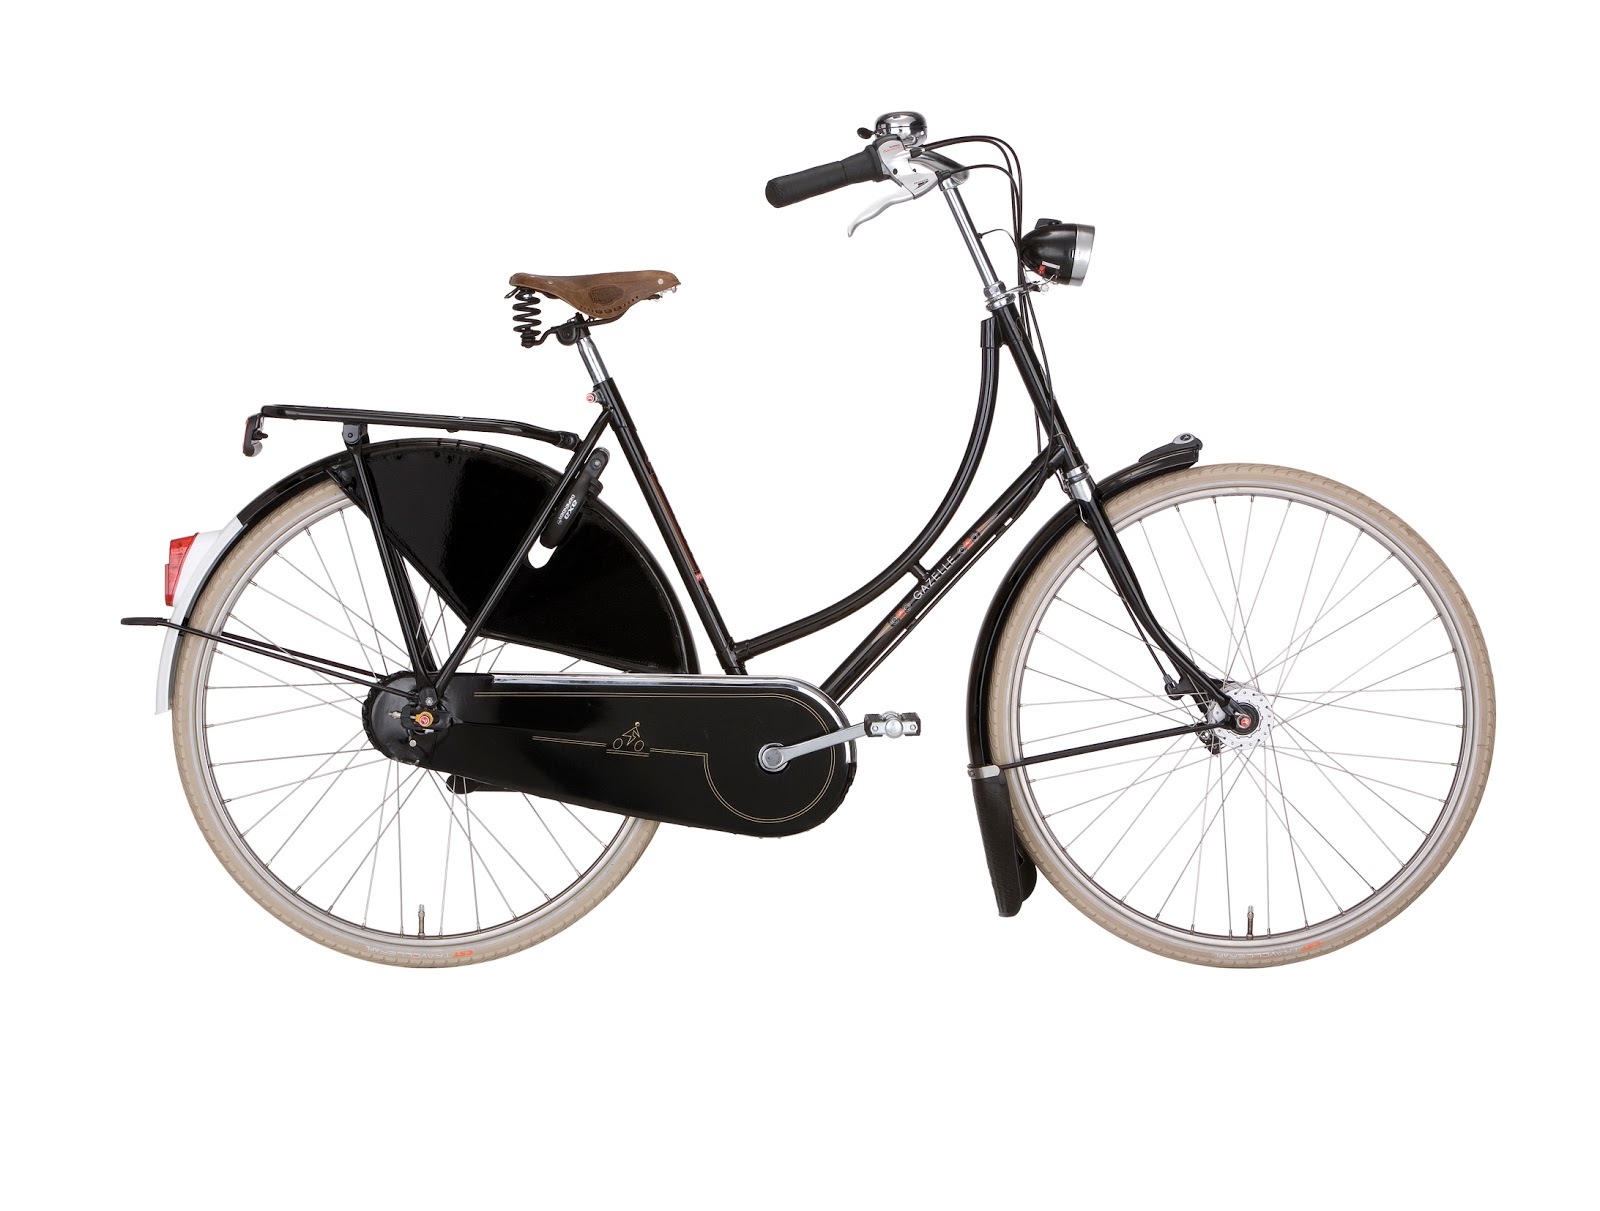 The full range of Bobbin's bikes are expected instore in March.